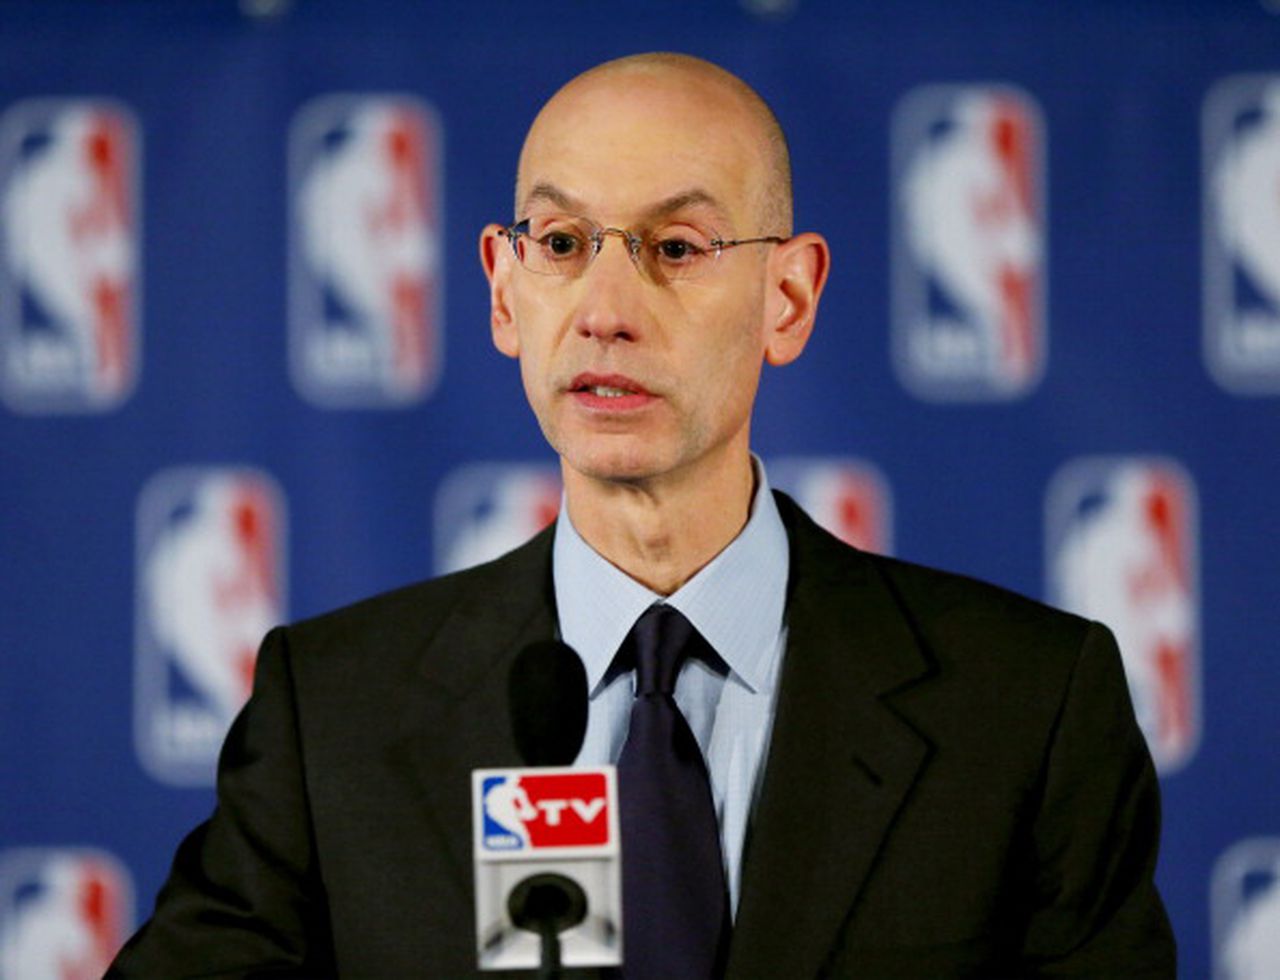 NBA sets July 31 target date for return to play; Cavaliers’ season likely over